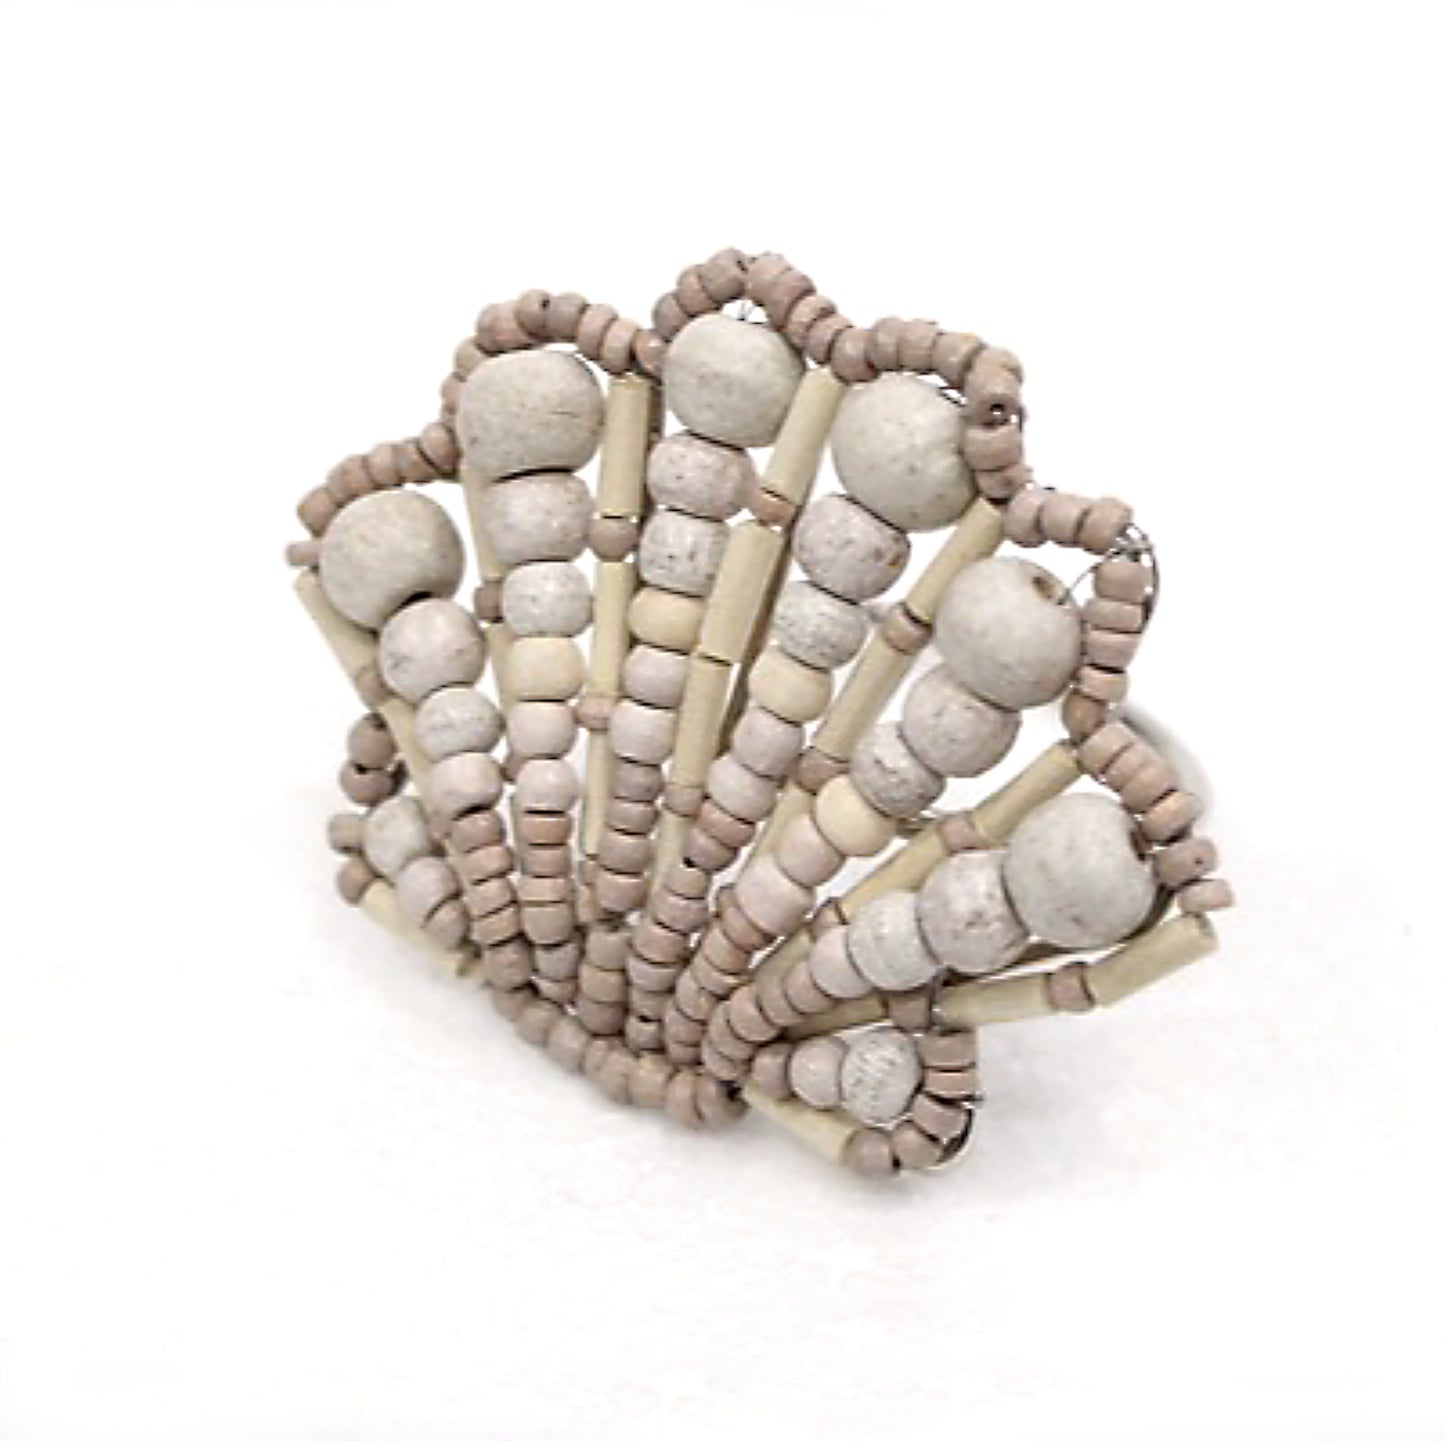 Scallop shell shaped napkin ring crafted of natural wooden beads and metal wire side view.